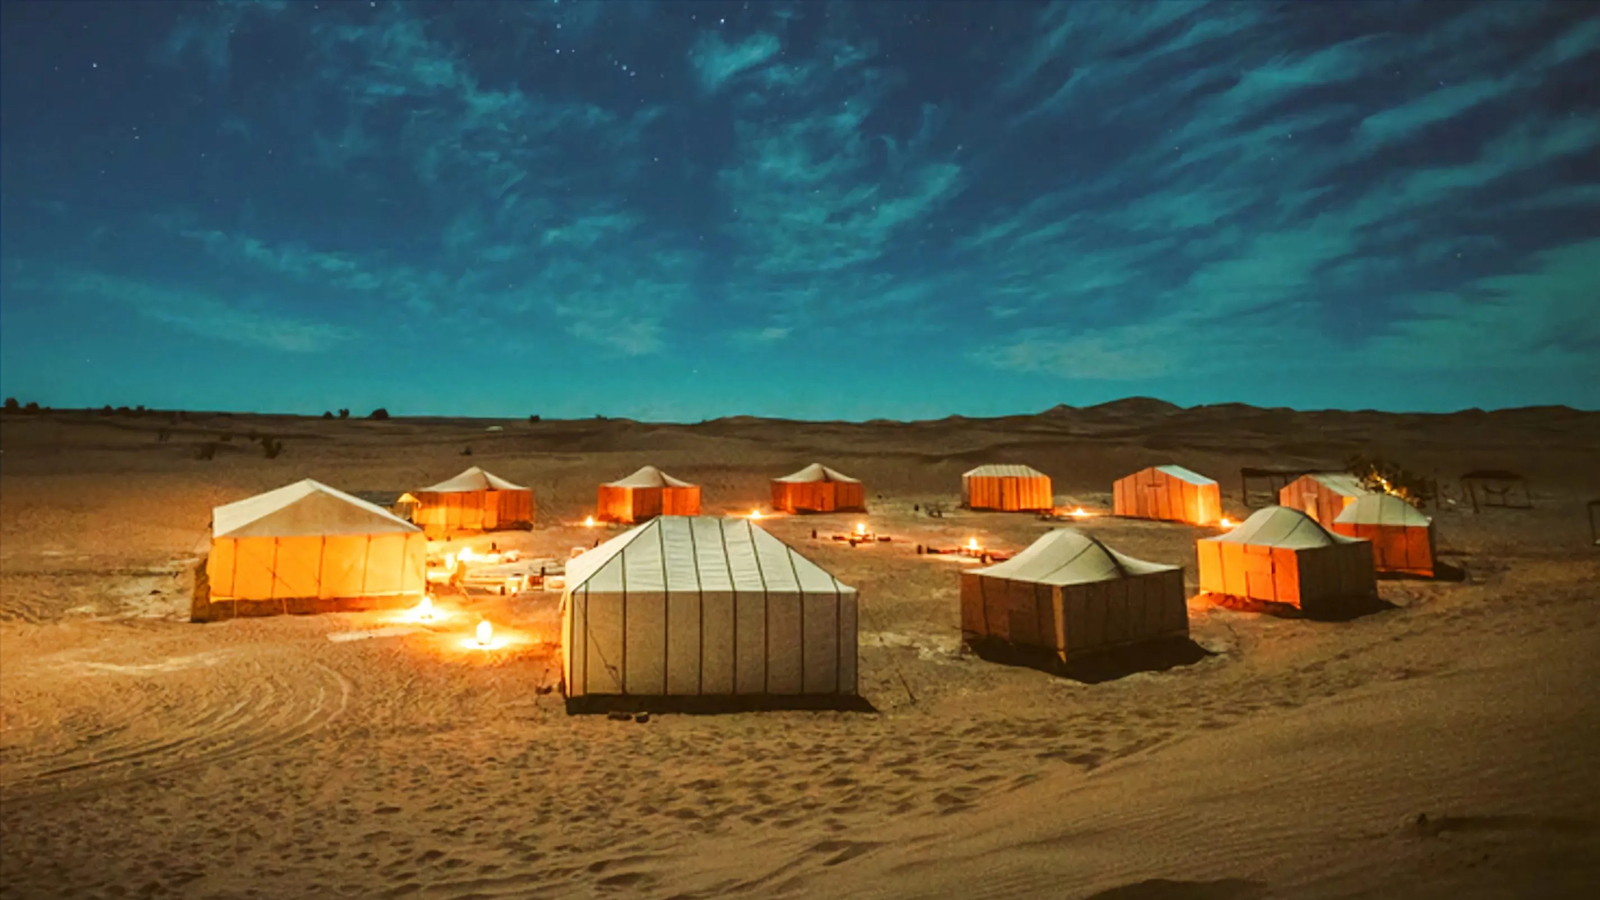 Qatar Runs Out Of Hotels, Puts World Cup Fans In Desert Tents Instead